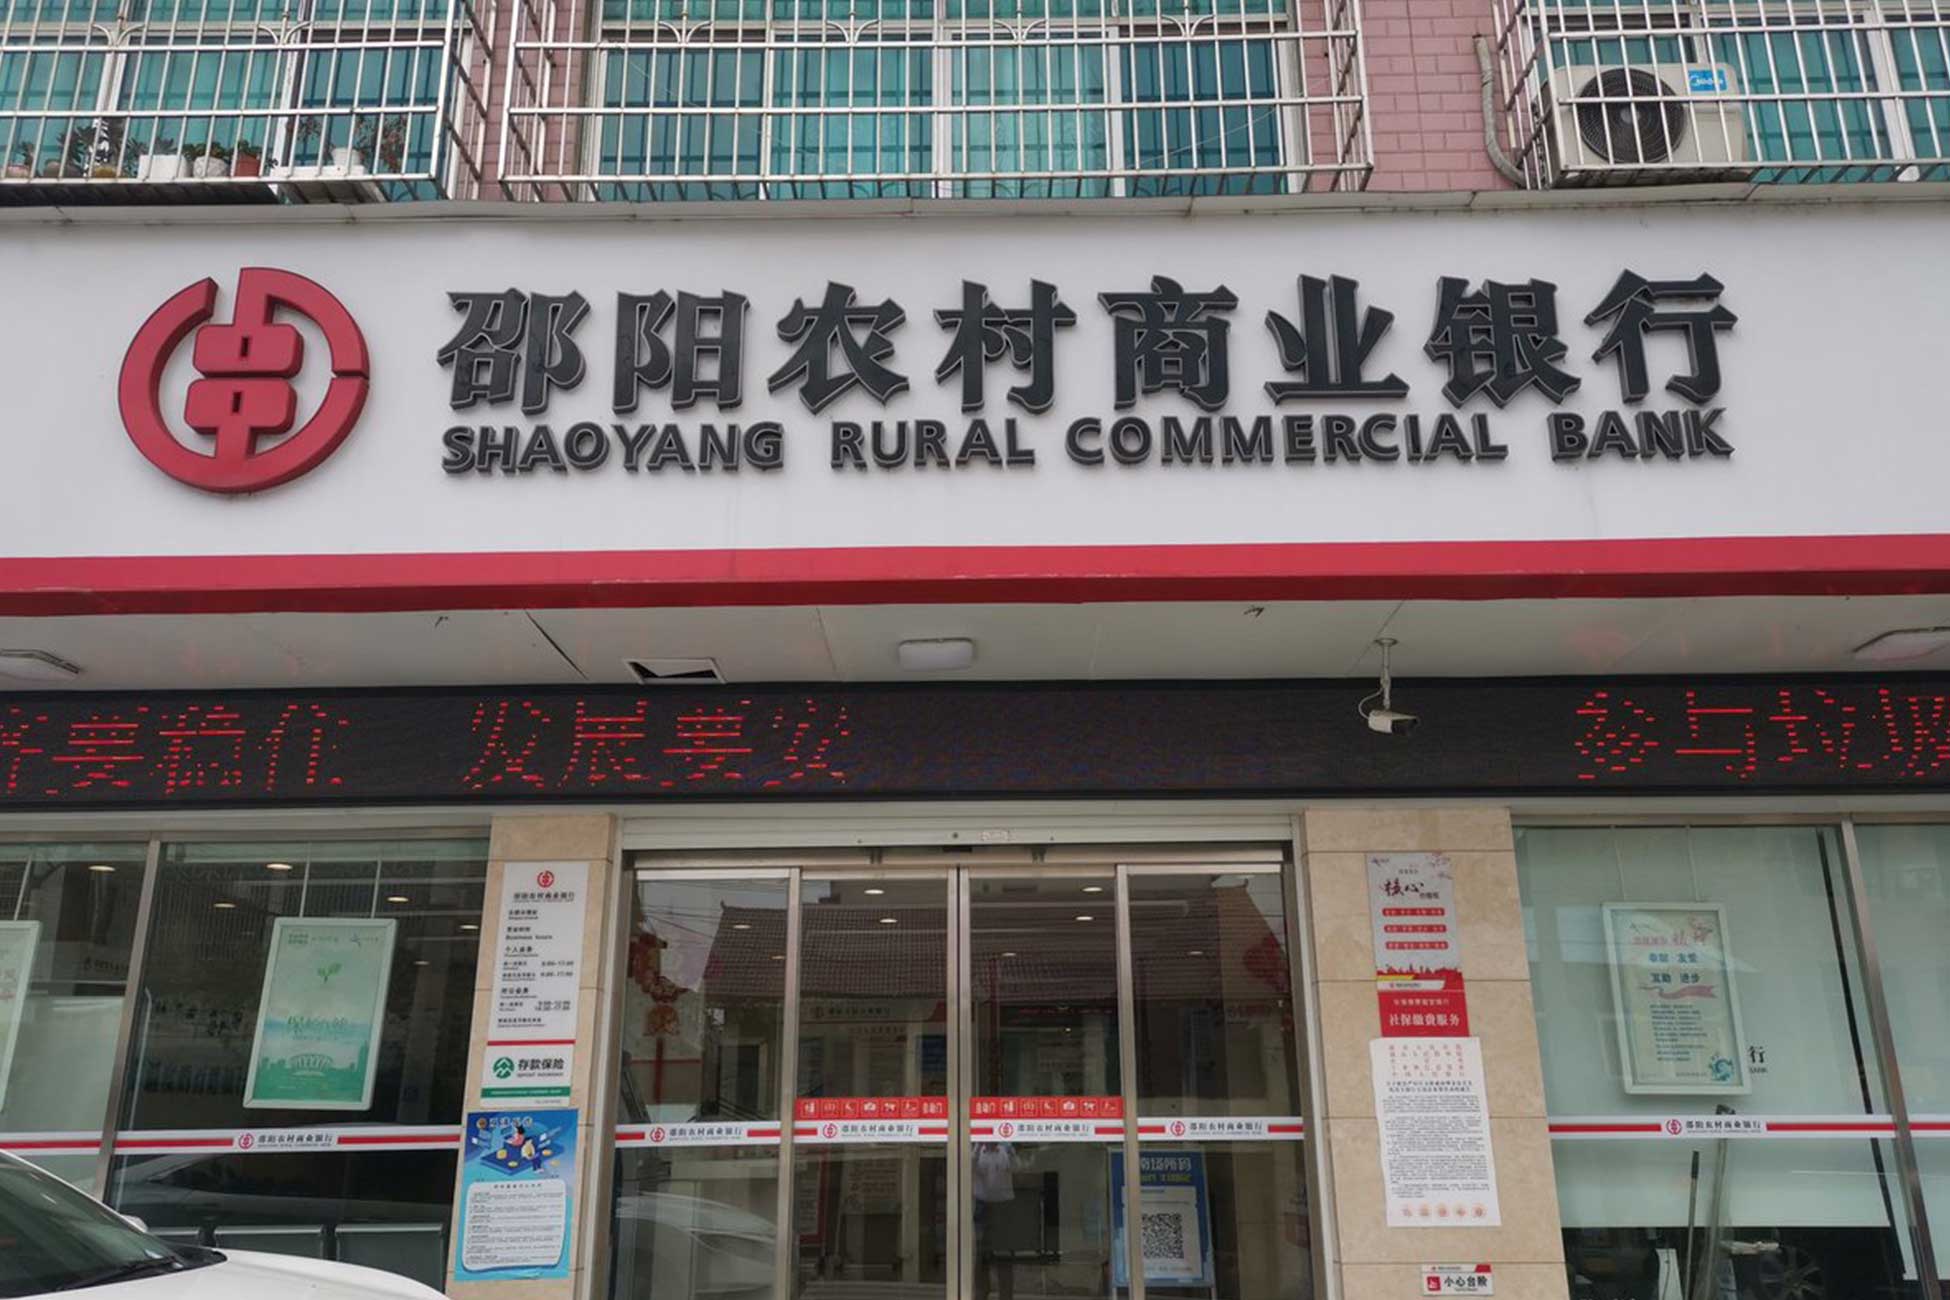 Open a bank account in Shaoyang